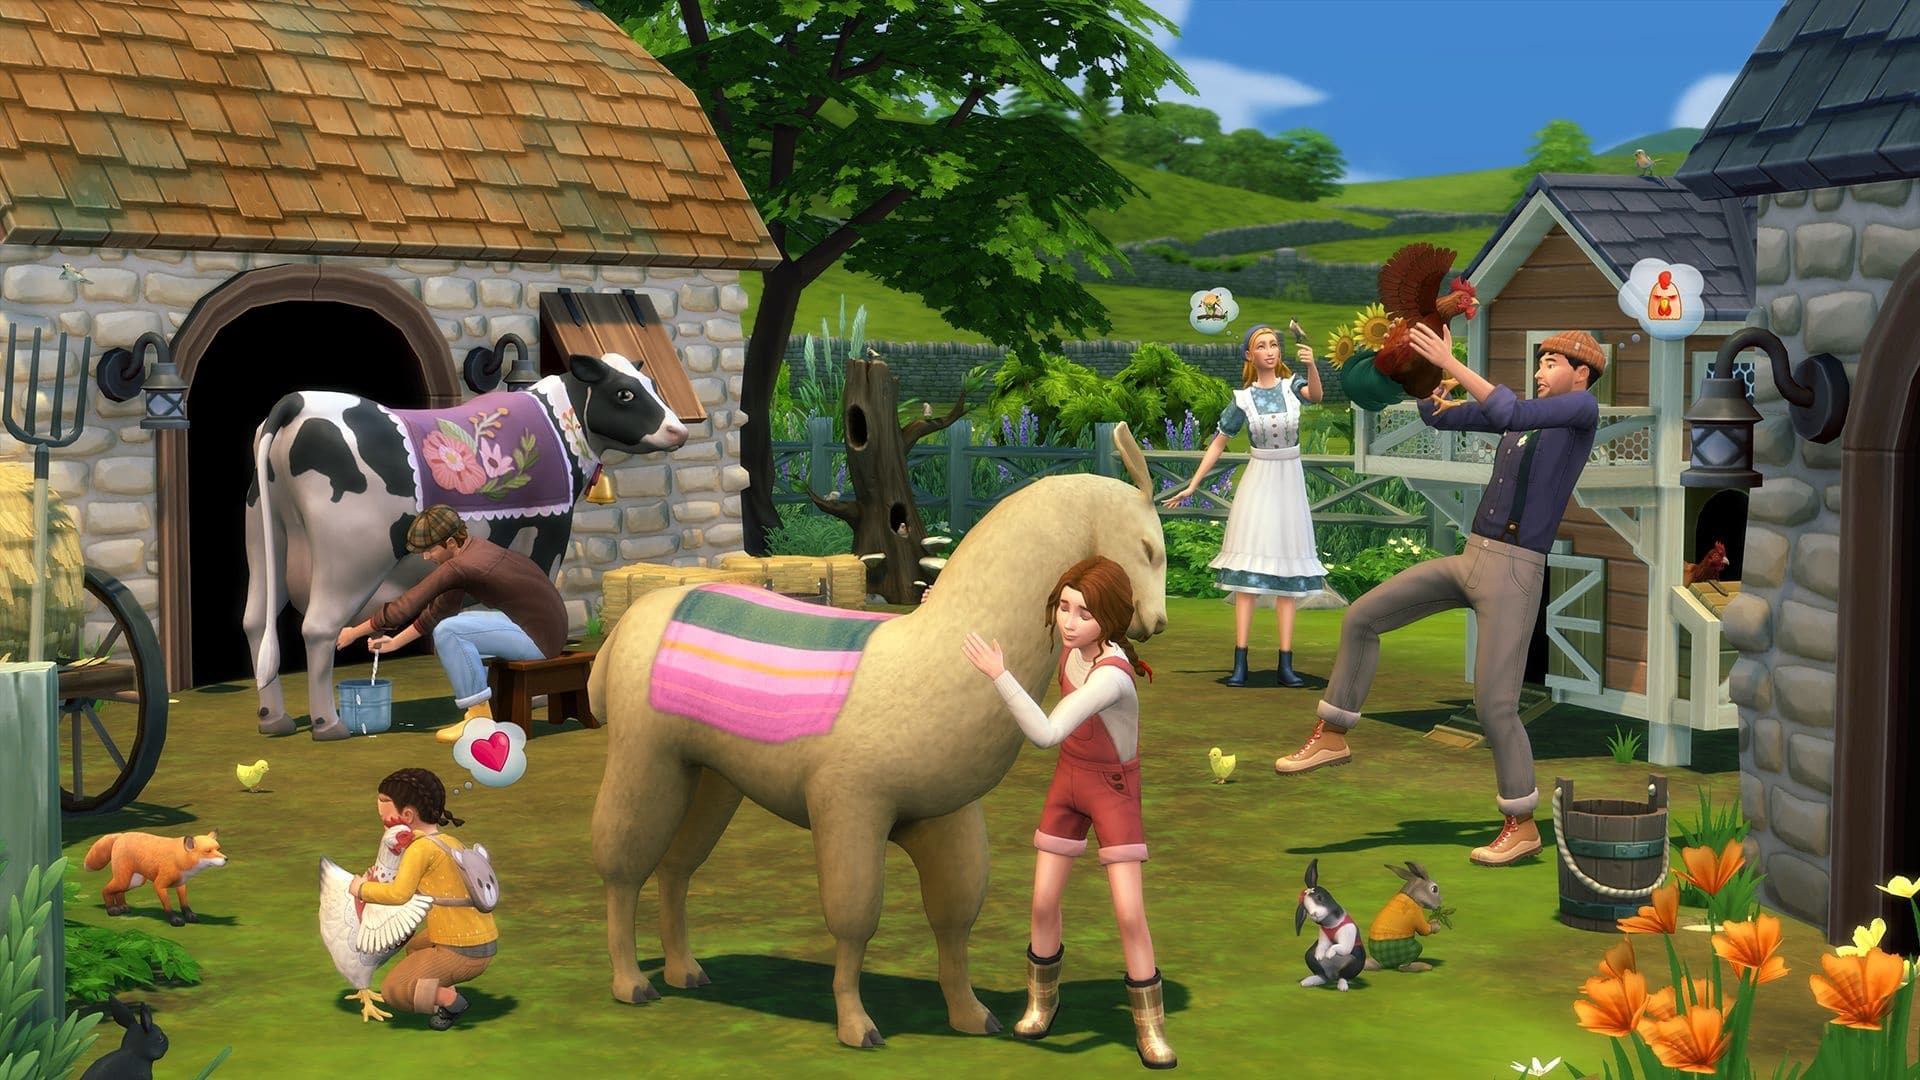 Milking cows, raising llamas and not getting pecked by chickens: Sims have plenty to do on the farm